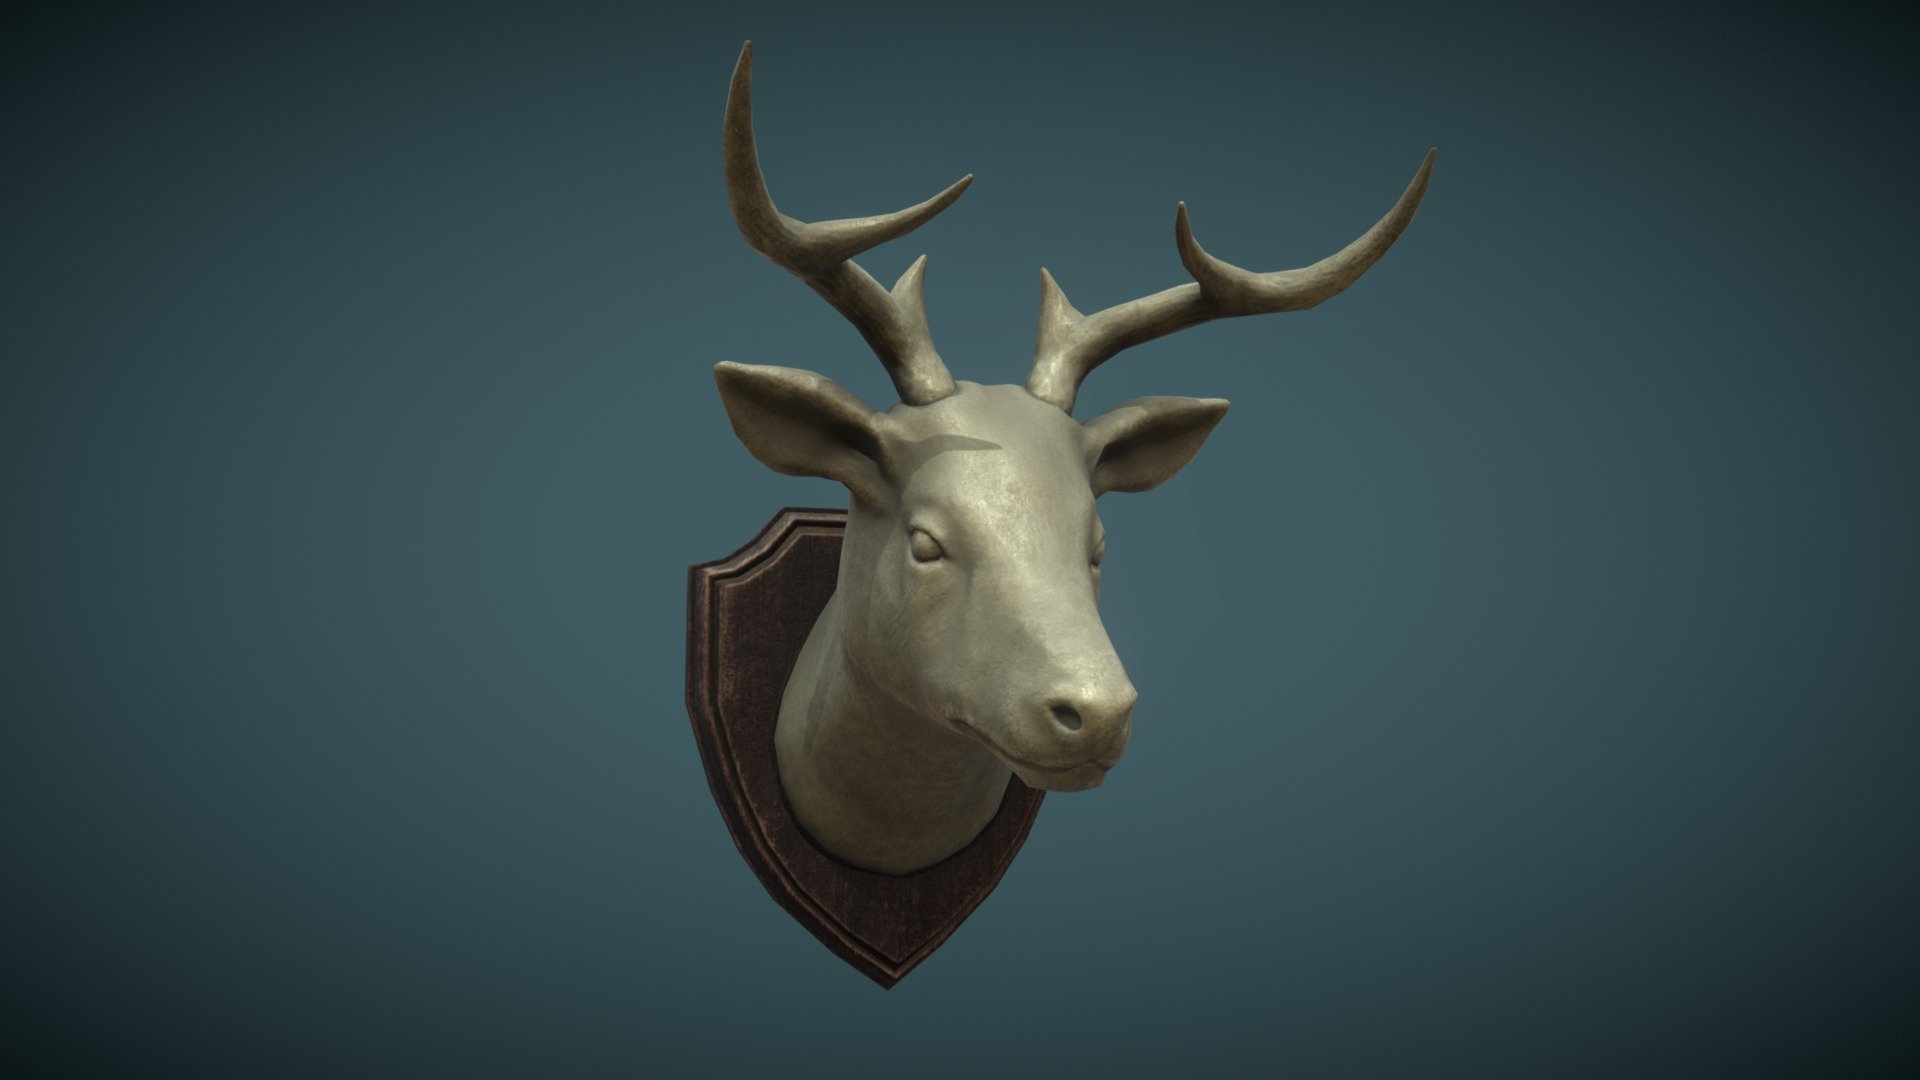 This is a prop I made this summer! The goal was to make a stylized deer head statue that could be put on a wall. 
The focus was on the making of the model, the optimization and the textures.

For this project, I used Zbrush, Maya and Substance Painter! 

More details and pictures about the project can be found on my Artstation:
https://www.artstation.com/jessycajm - Deer Head Statue - 3D model by Jessyca JM (@Jessyca) 3d model